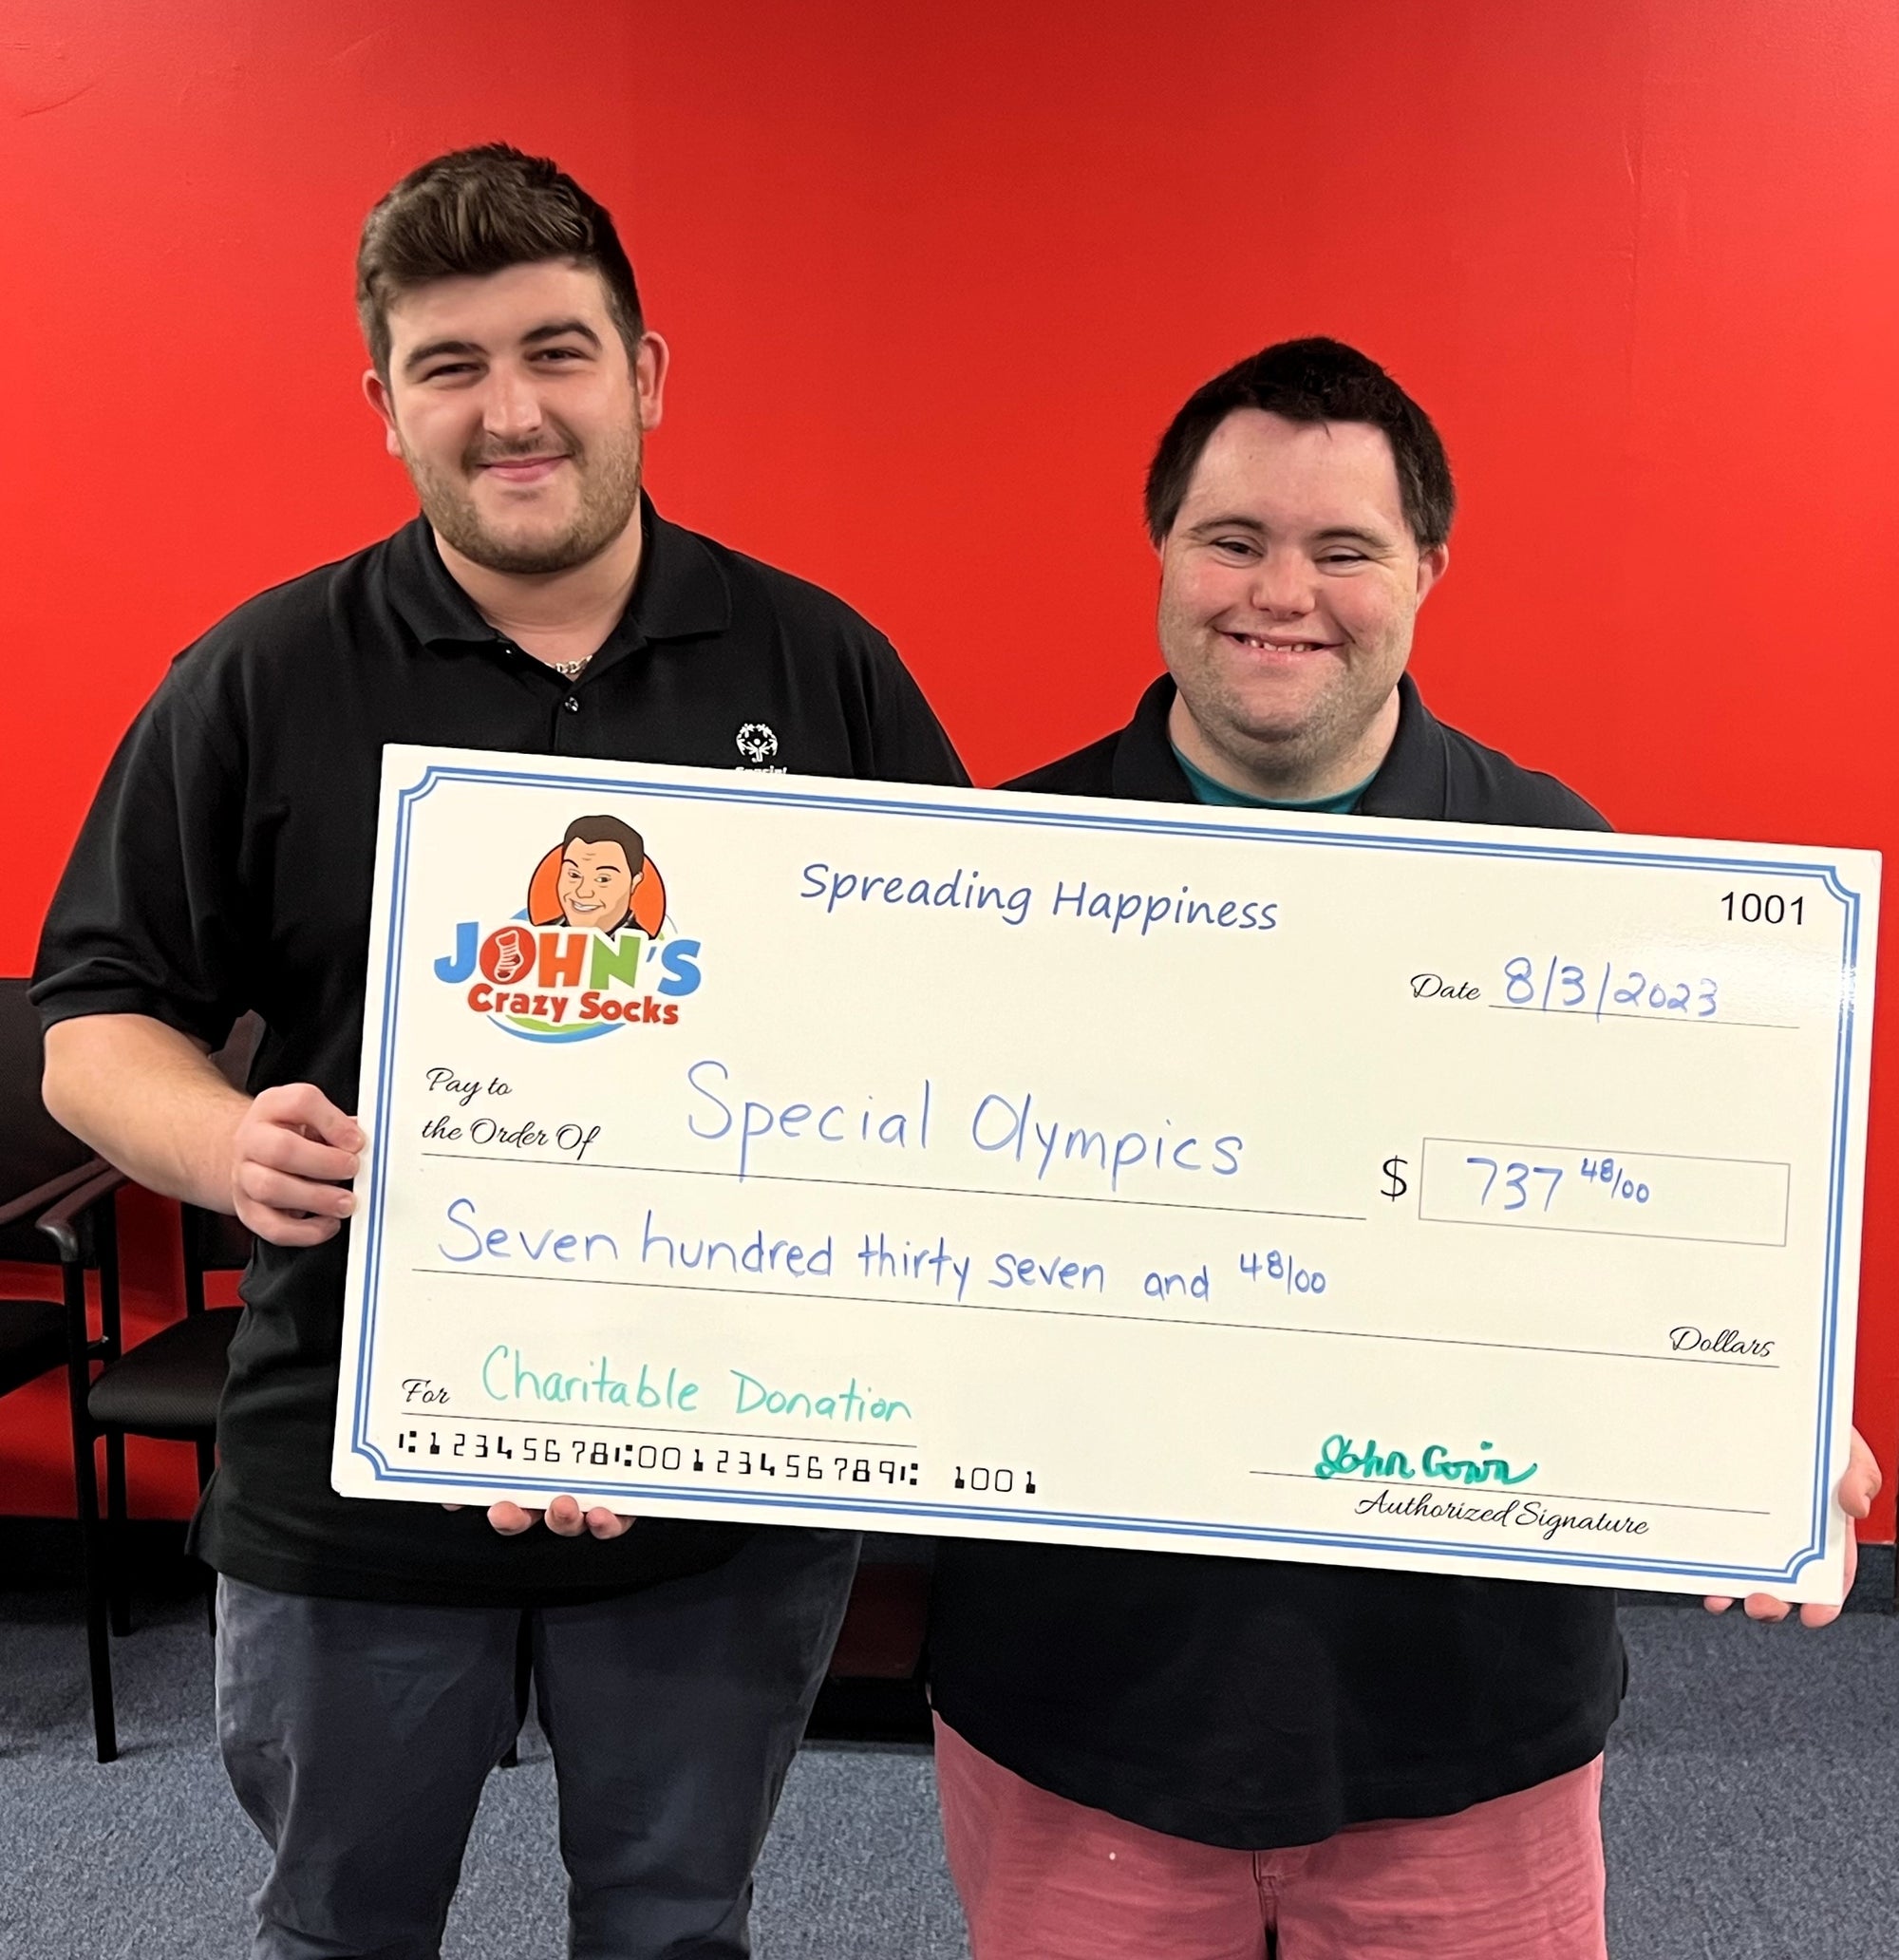 John’s Crazy Socks Delivers a Donation Check to the Special Olympics NY